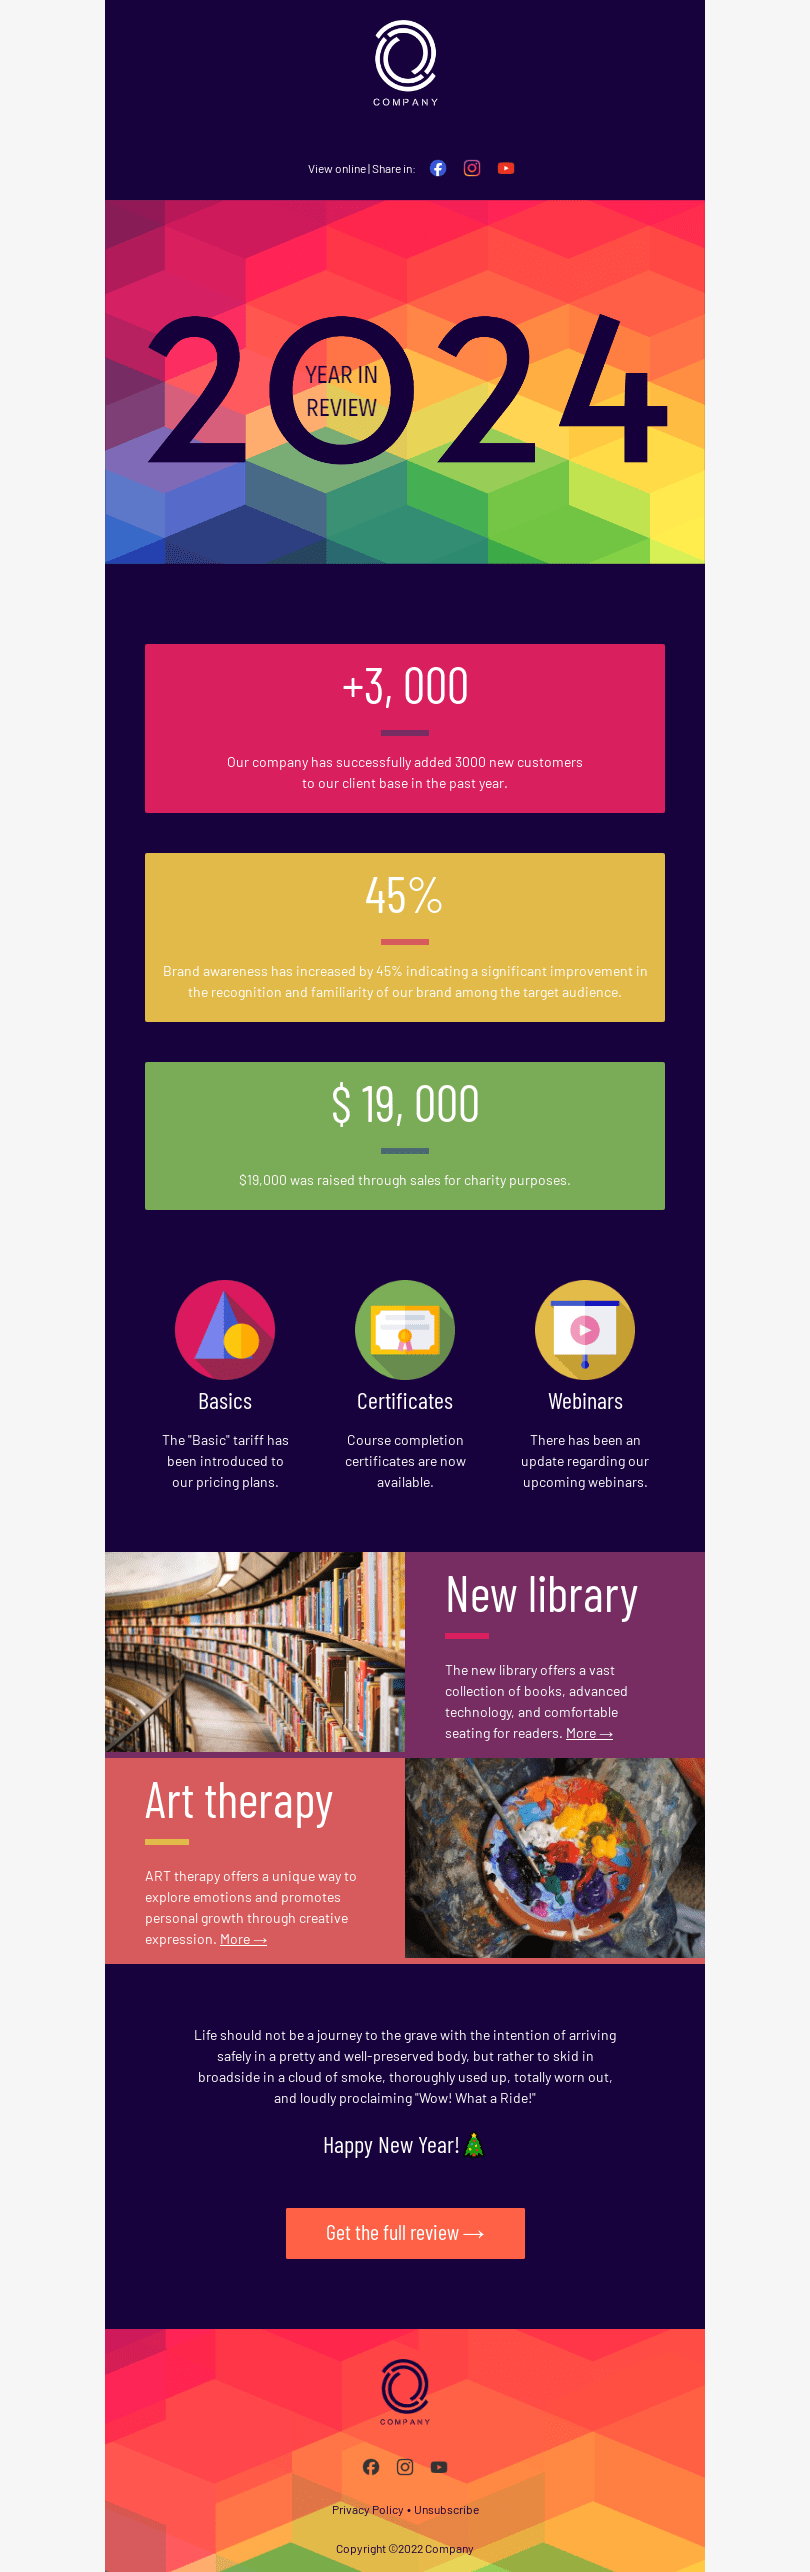 Colorful year in numbers Email Template by Anastasiia Babintseva